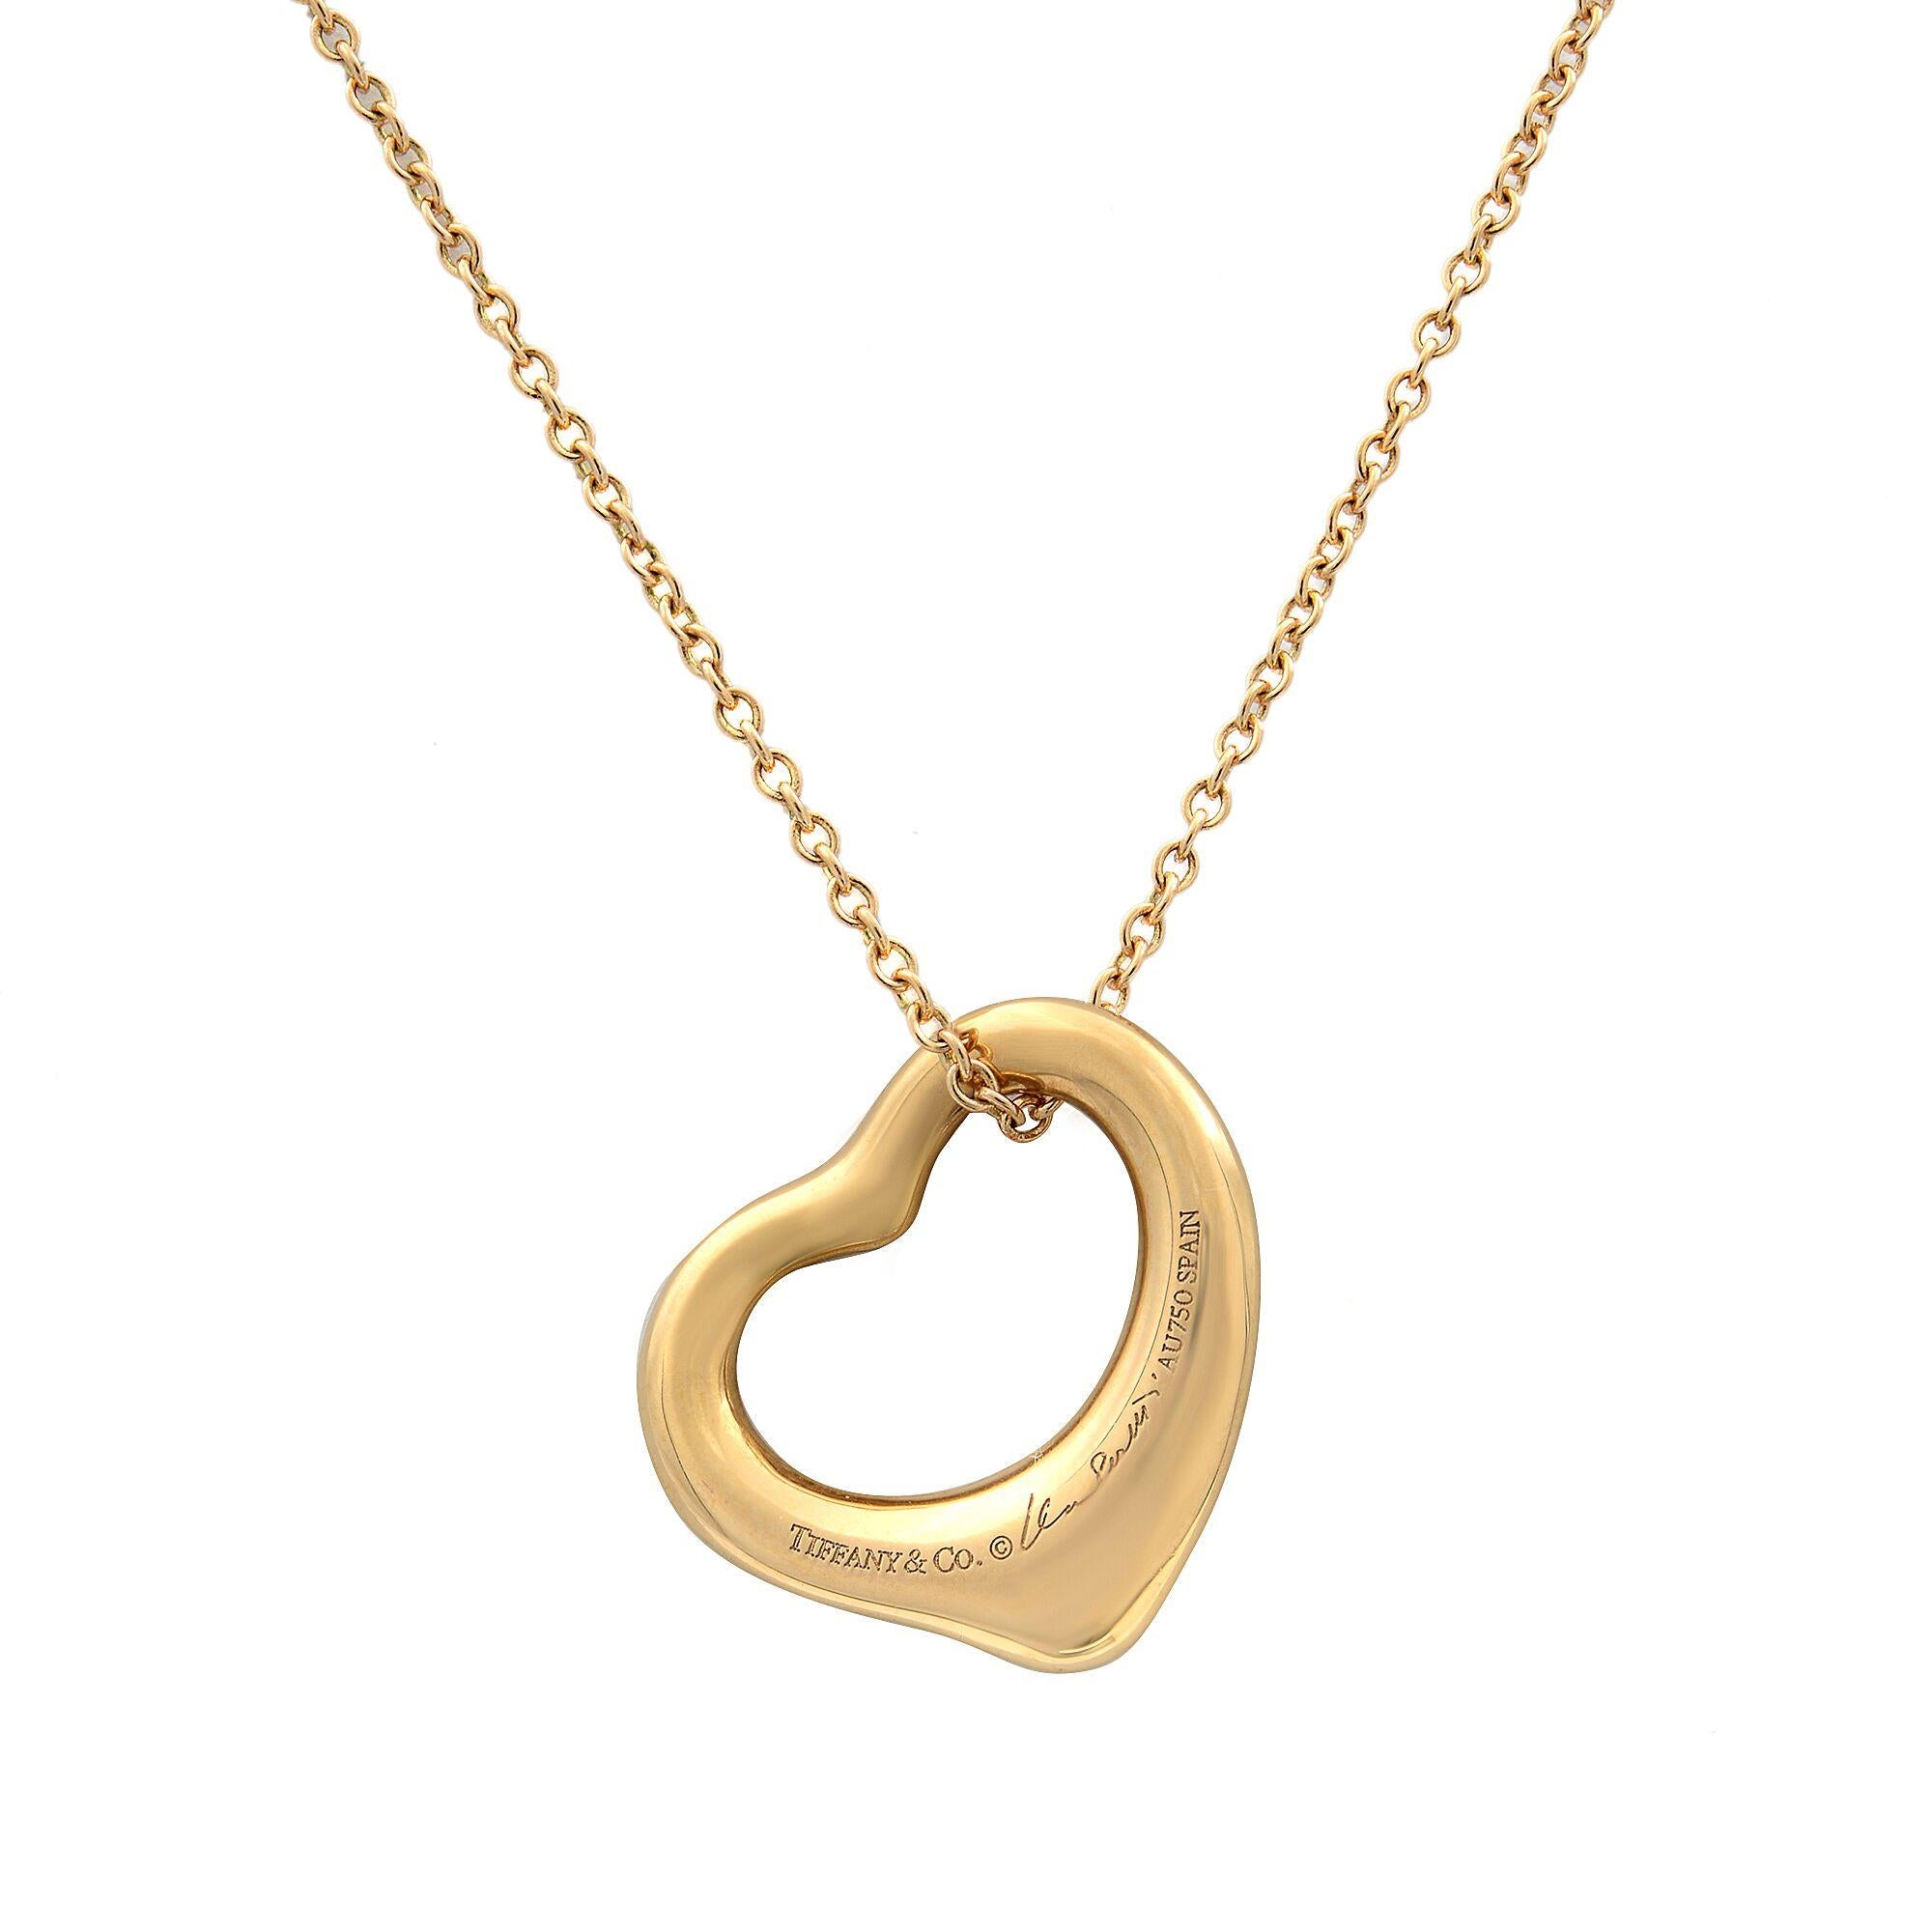 This is Tiffany's simple, evocative shape of Elsa Peretti Open Heart. This design celebrates the spirit of love. Brilliant diamonds accentuate the elegant curves of this pendant. Size small. 18k gold with diamonds, 0.02cts. Chain Length: 16 inches.